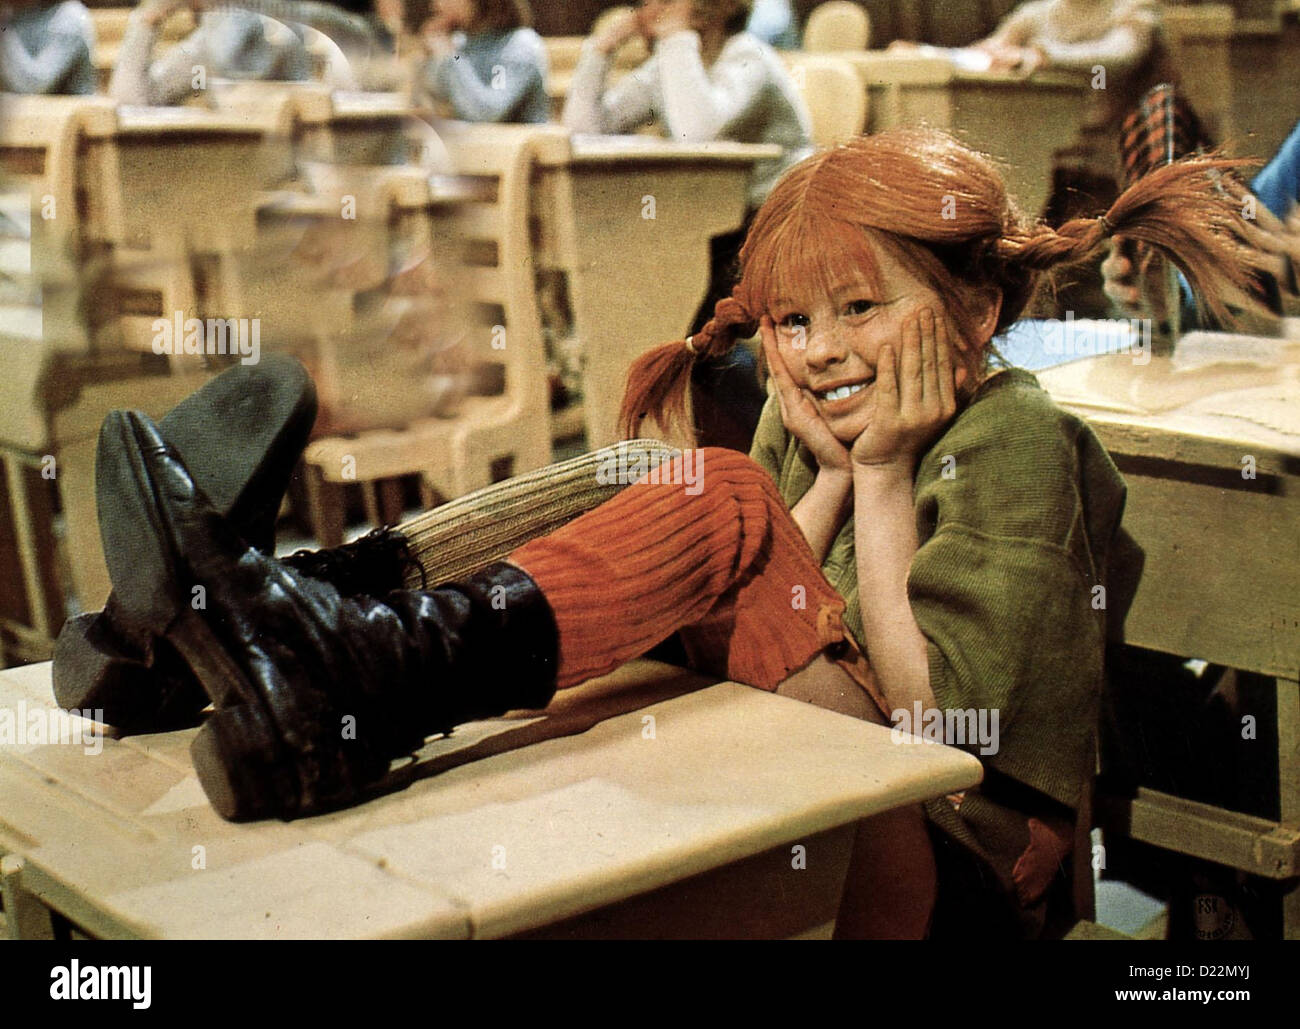 Pippi Långstrump High Resolution Stock Photography and Images - Alamy